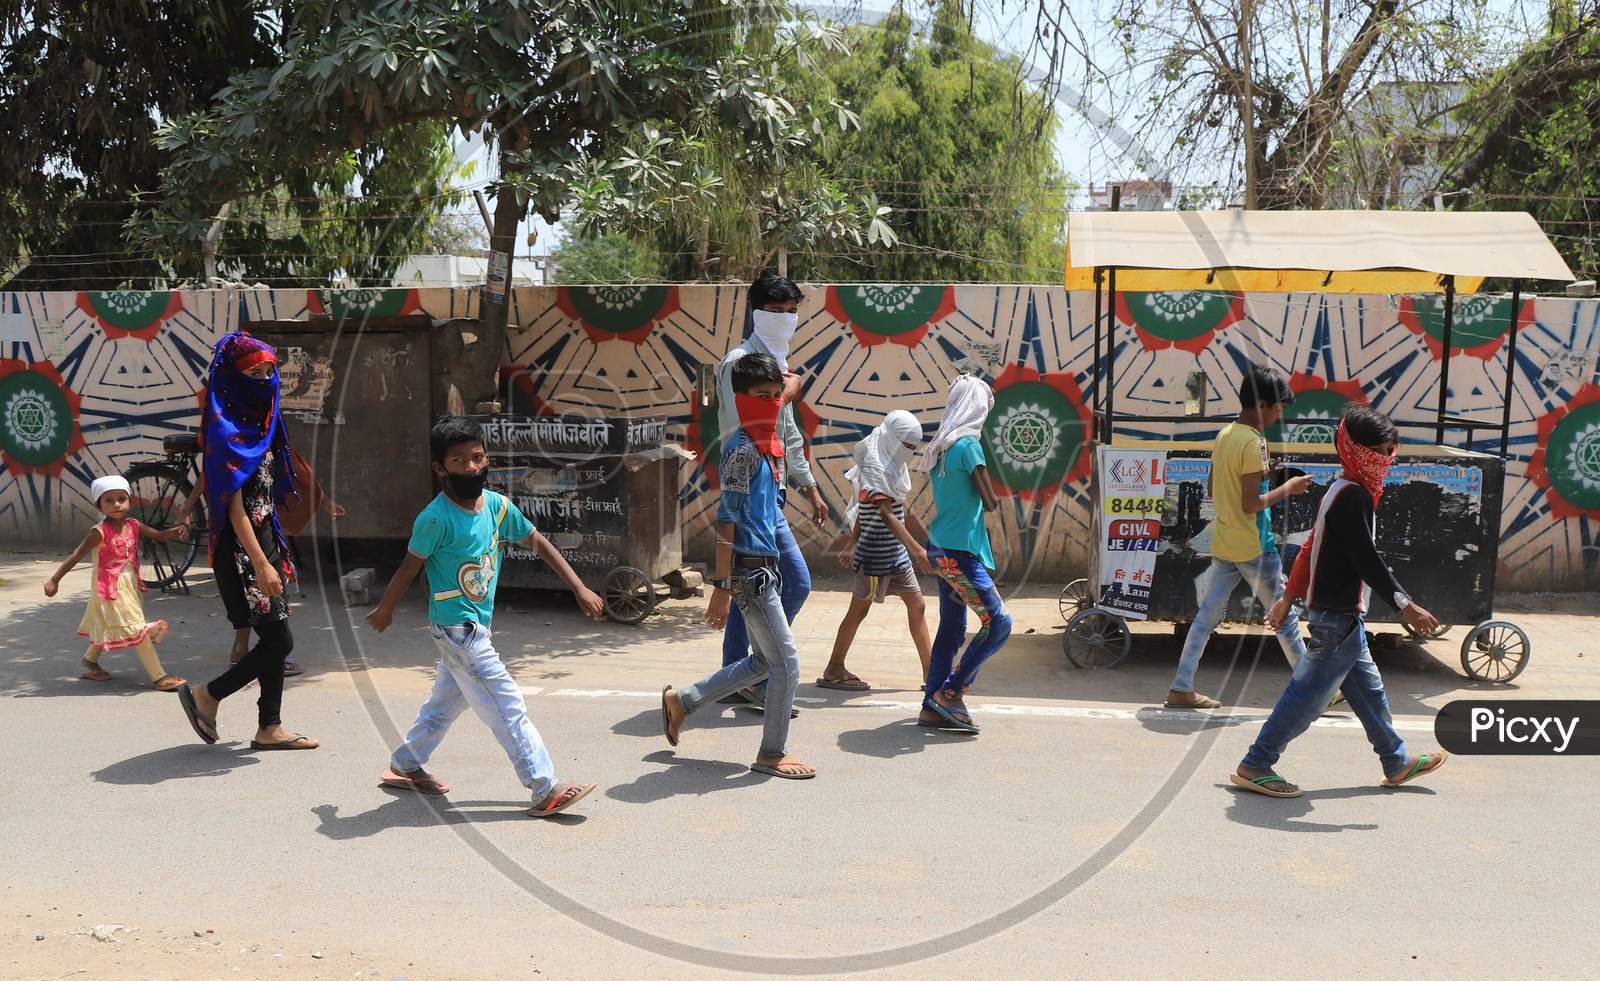 Children Arrive To Get Free Food Packets During A Government-Imposed Nationwide Lockdown As A Preventive Measure Against The Spread Of The Covid-19 Coronavirus In Prayagraj, April, 11, 2020.